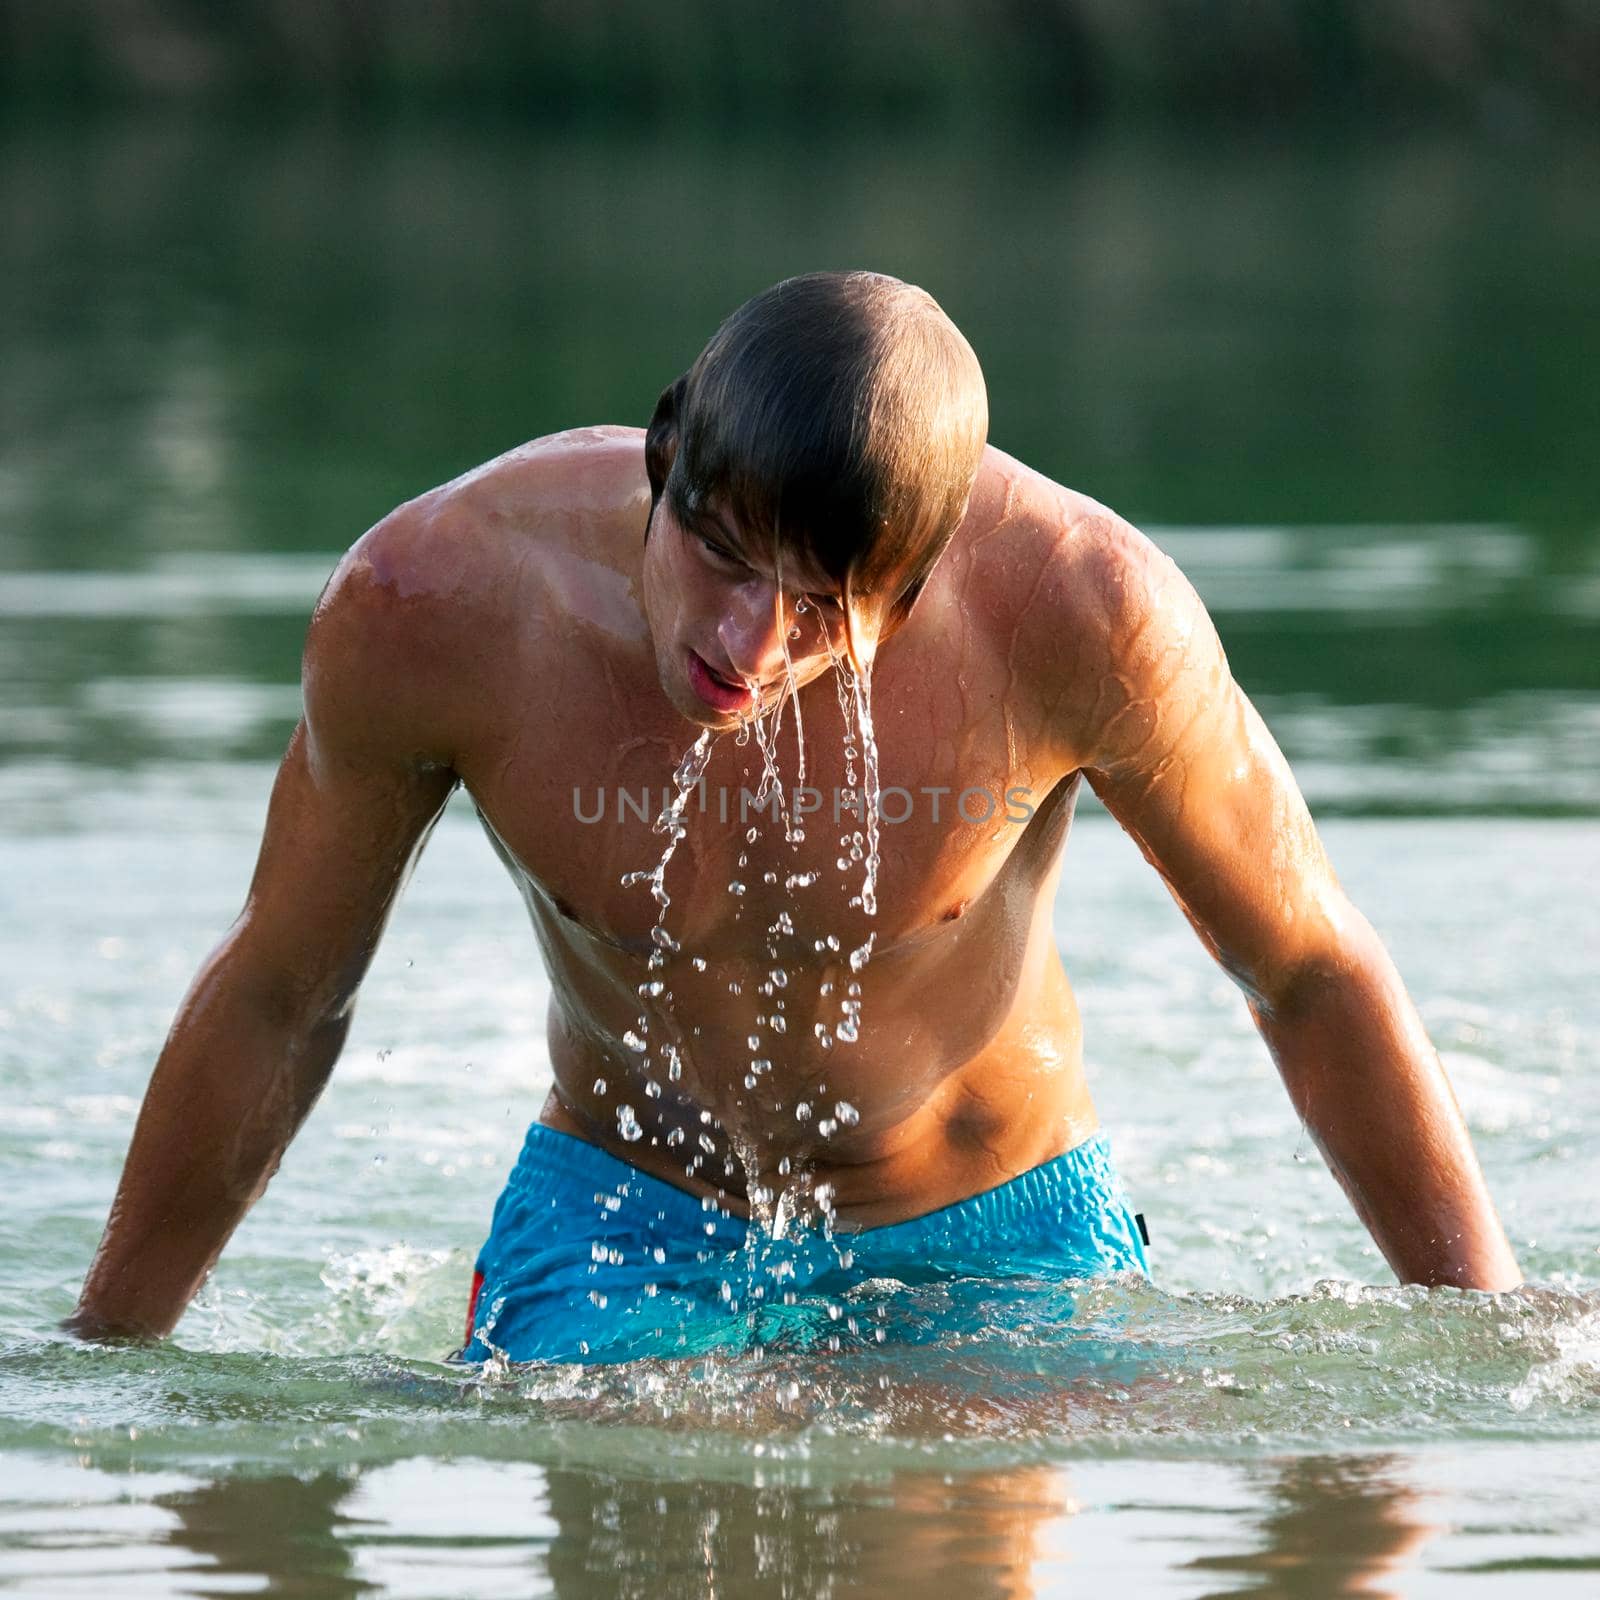 Very athletic swimmer getting out of the water, drops running down his body in beautiful light, it is summer